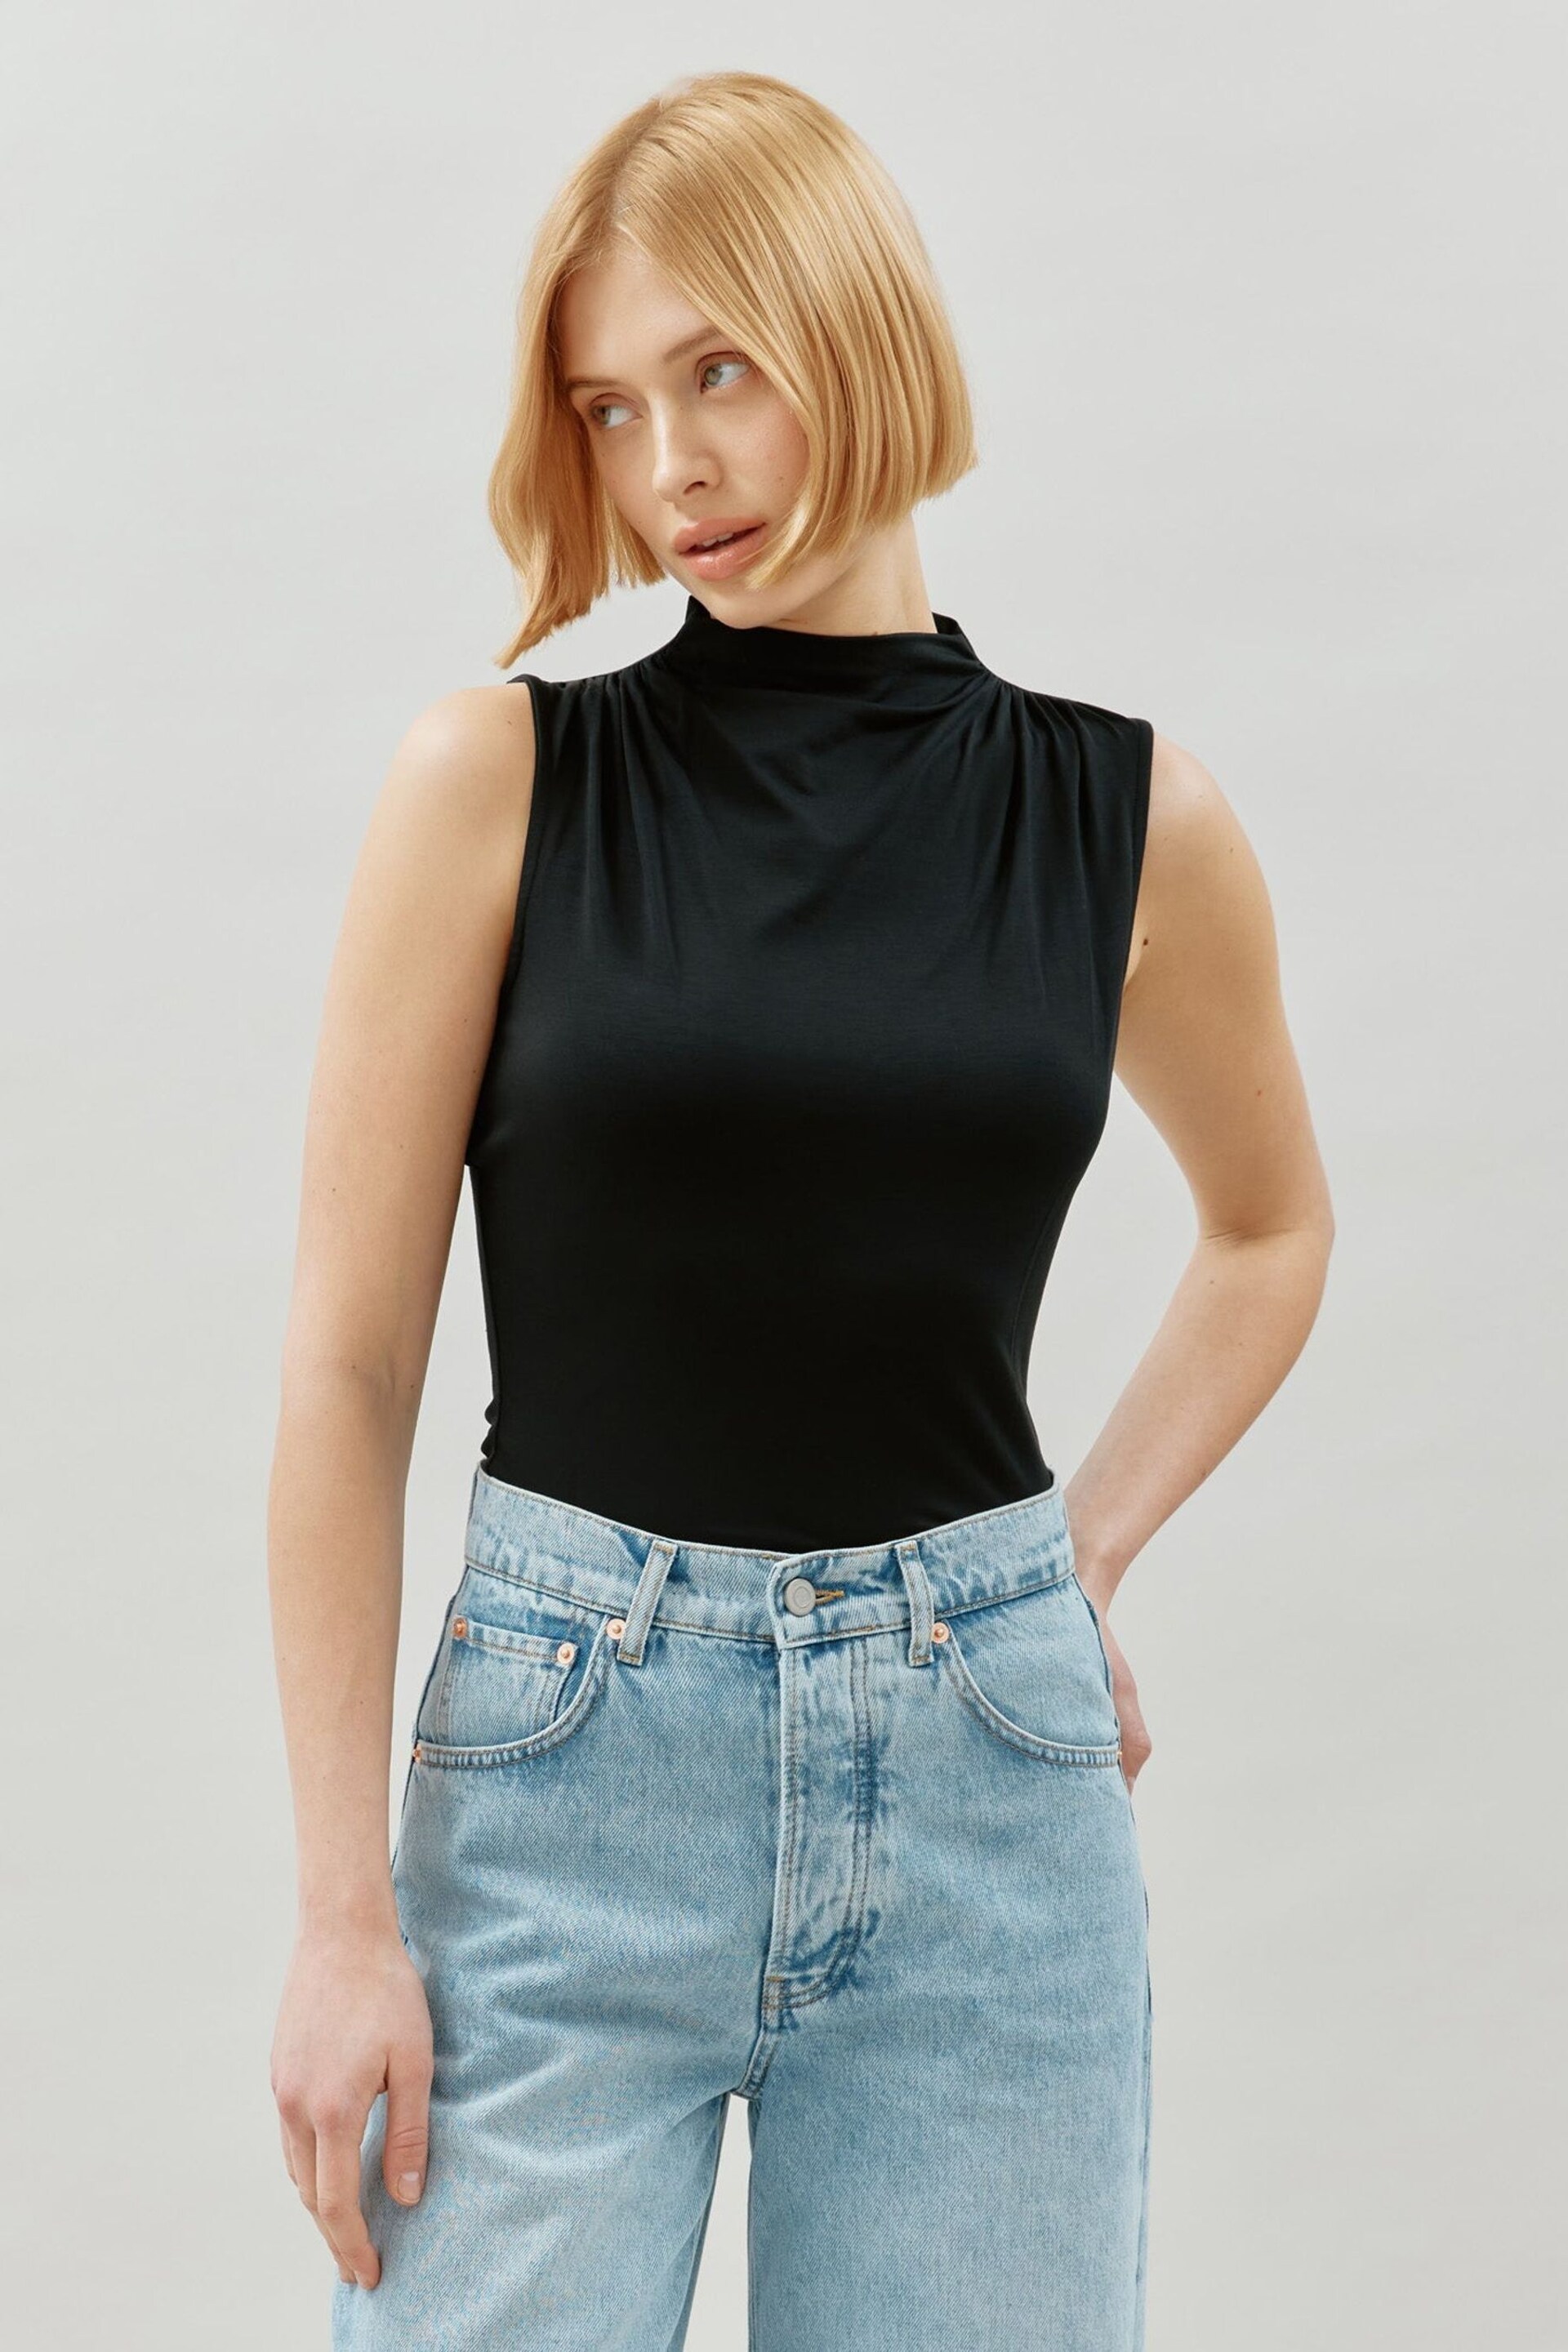 Albaray Sleeveless Ruched Turtle Neck Black Top - Image 1 of 4